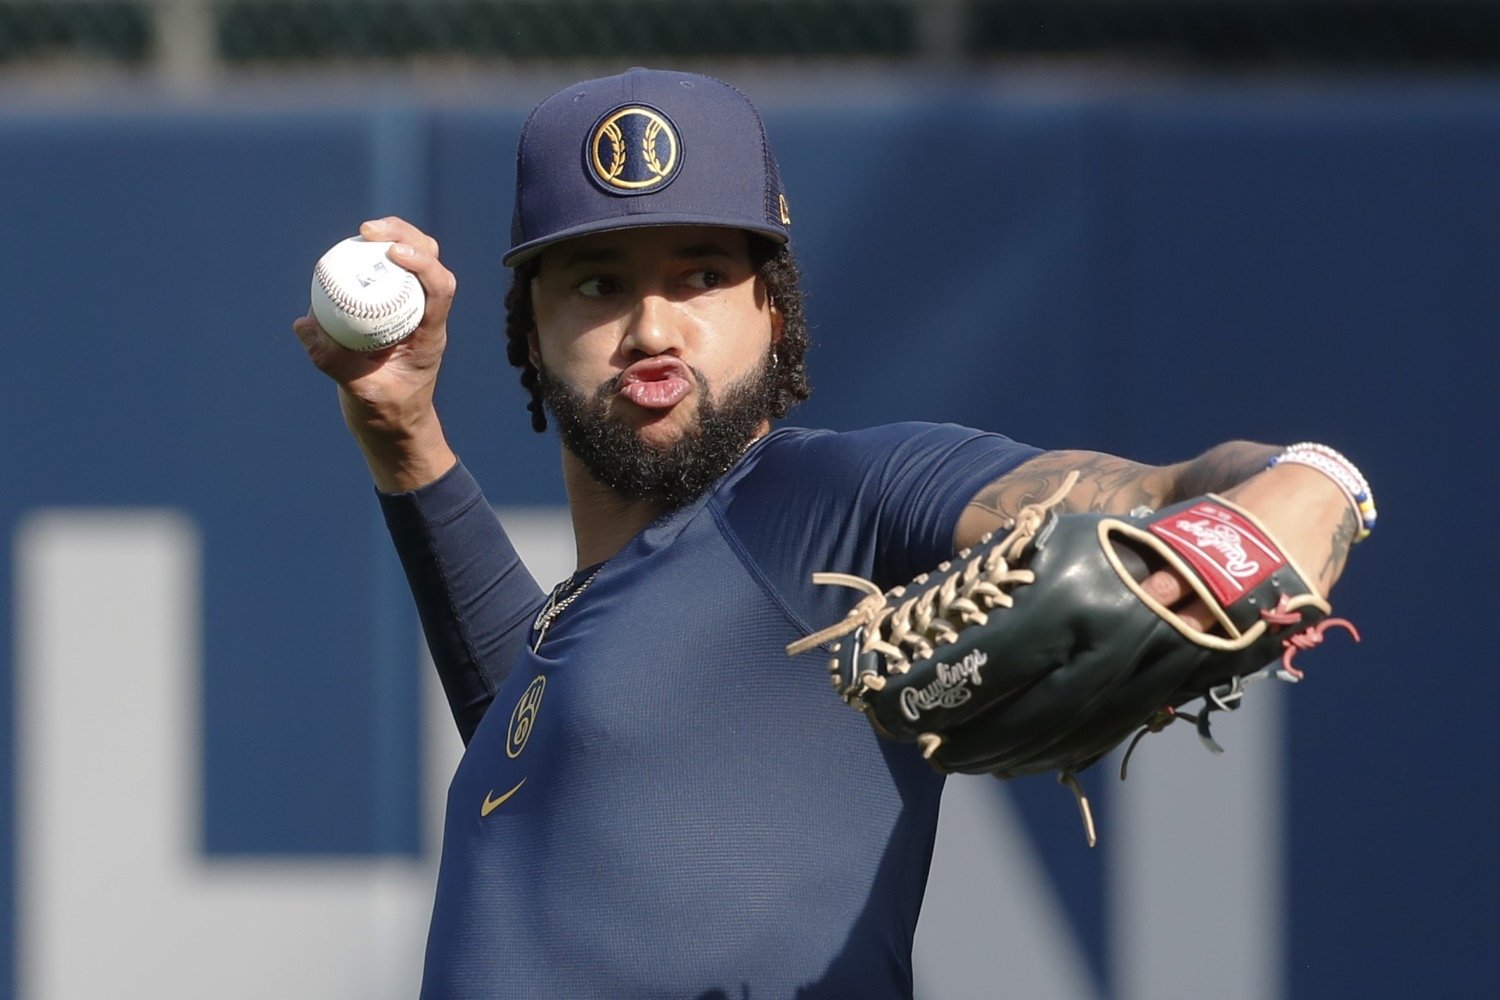 The Top 10 Milwaukee Brewers Players Right Now: No. 8 Devin Williams